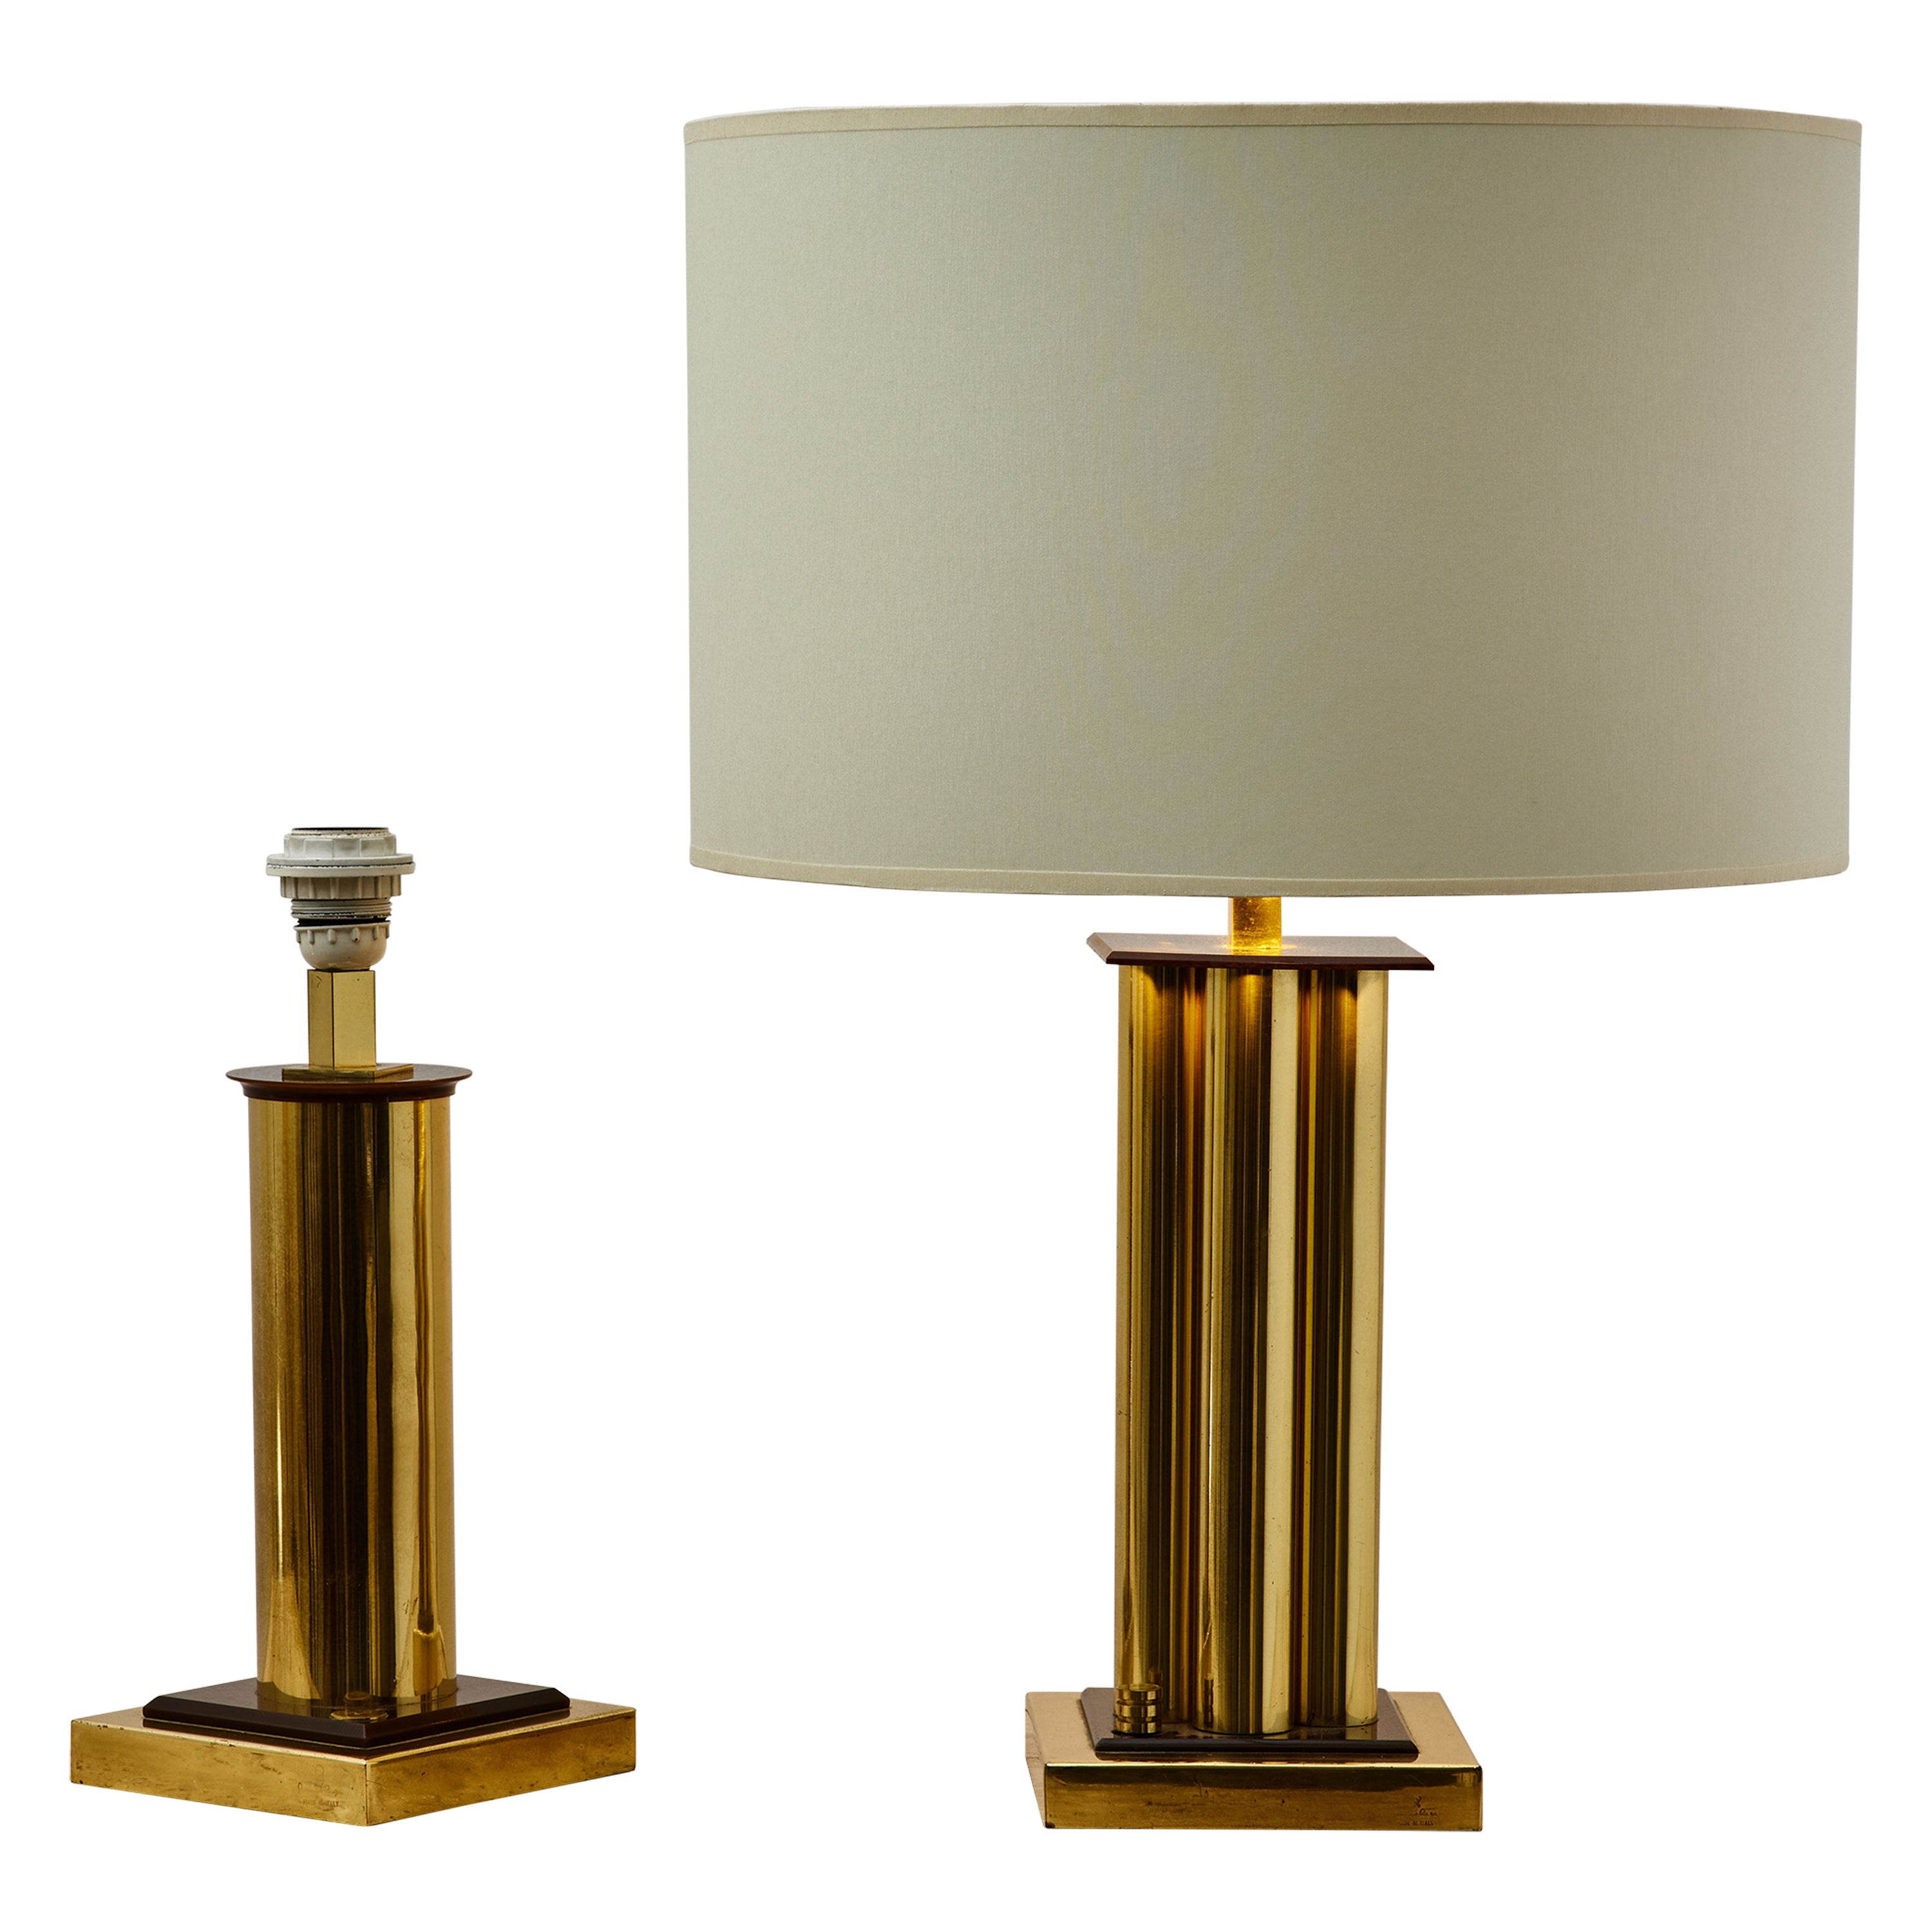 Rare table lamps by Romeo Rega At Cost Price For Sale